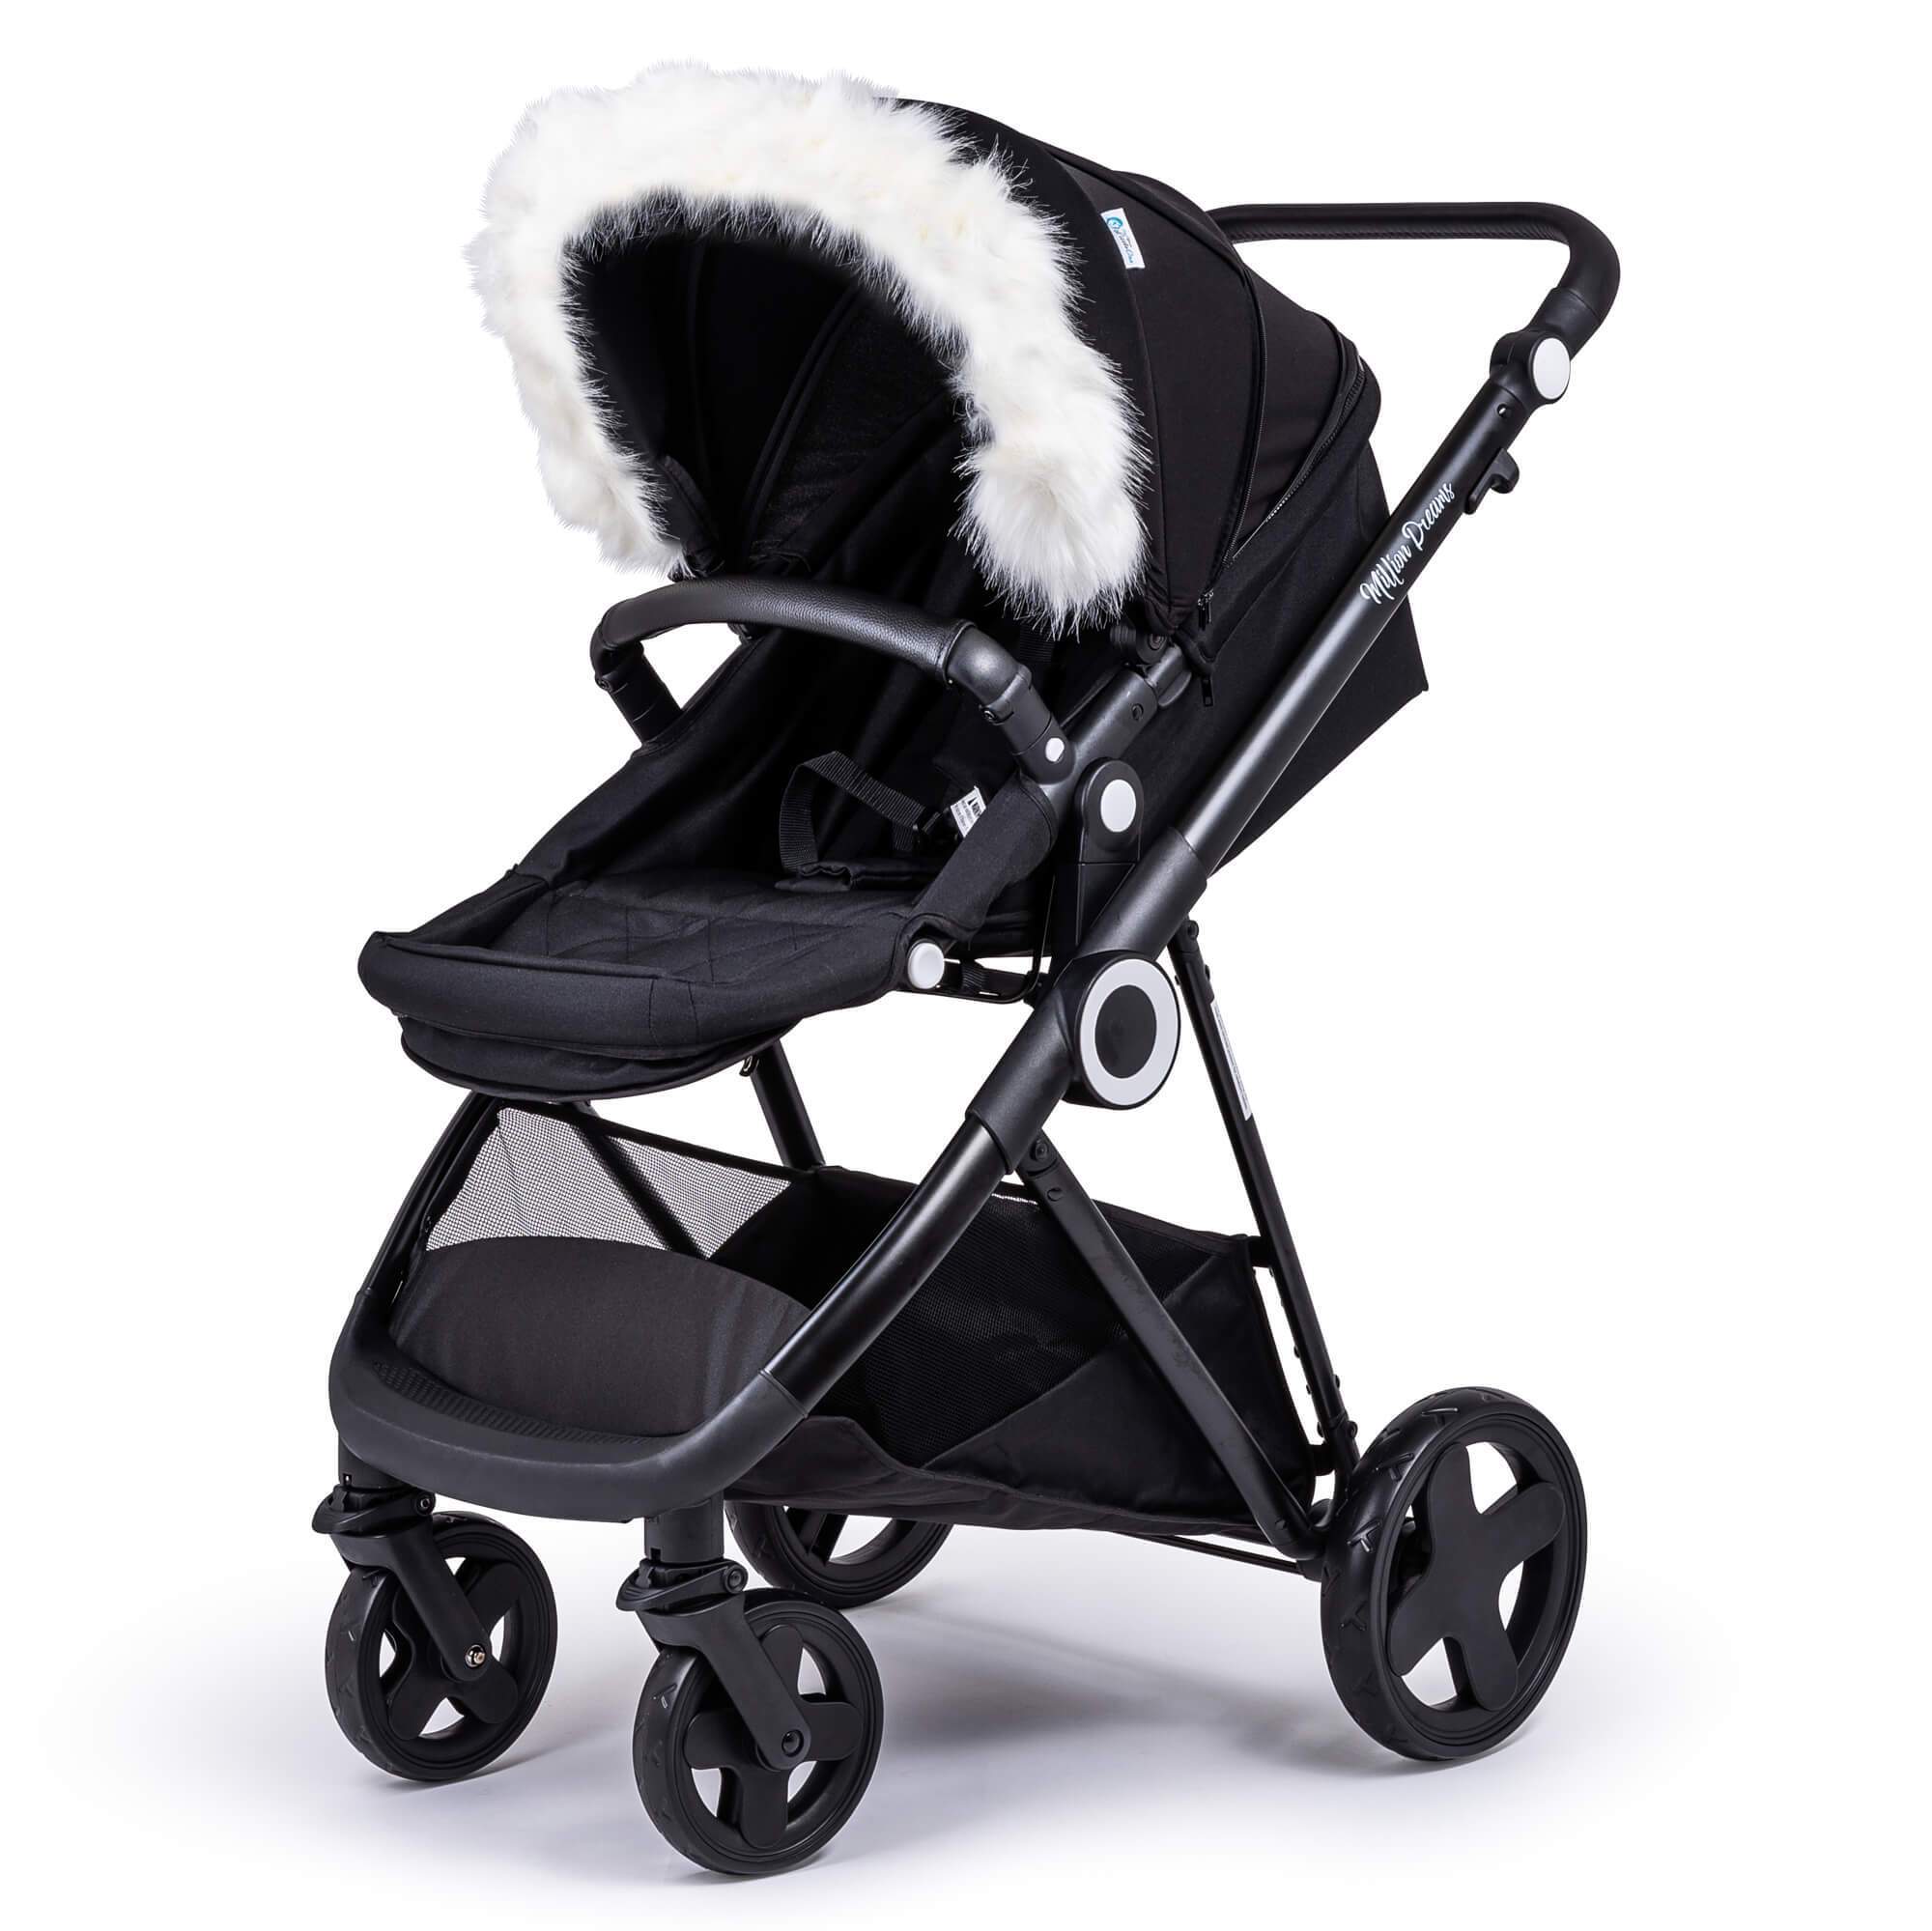 Pram Fur Hood Trim Attachment for Pushchair Compatible with Baby Trend - White / Fits All Models | For Your Little One